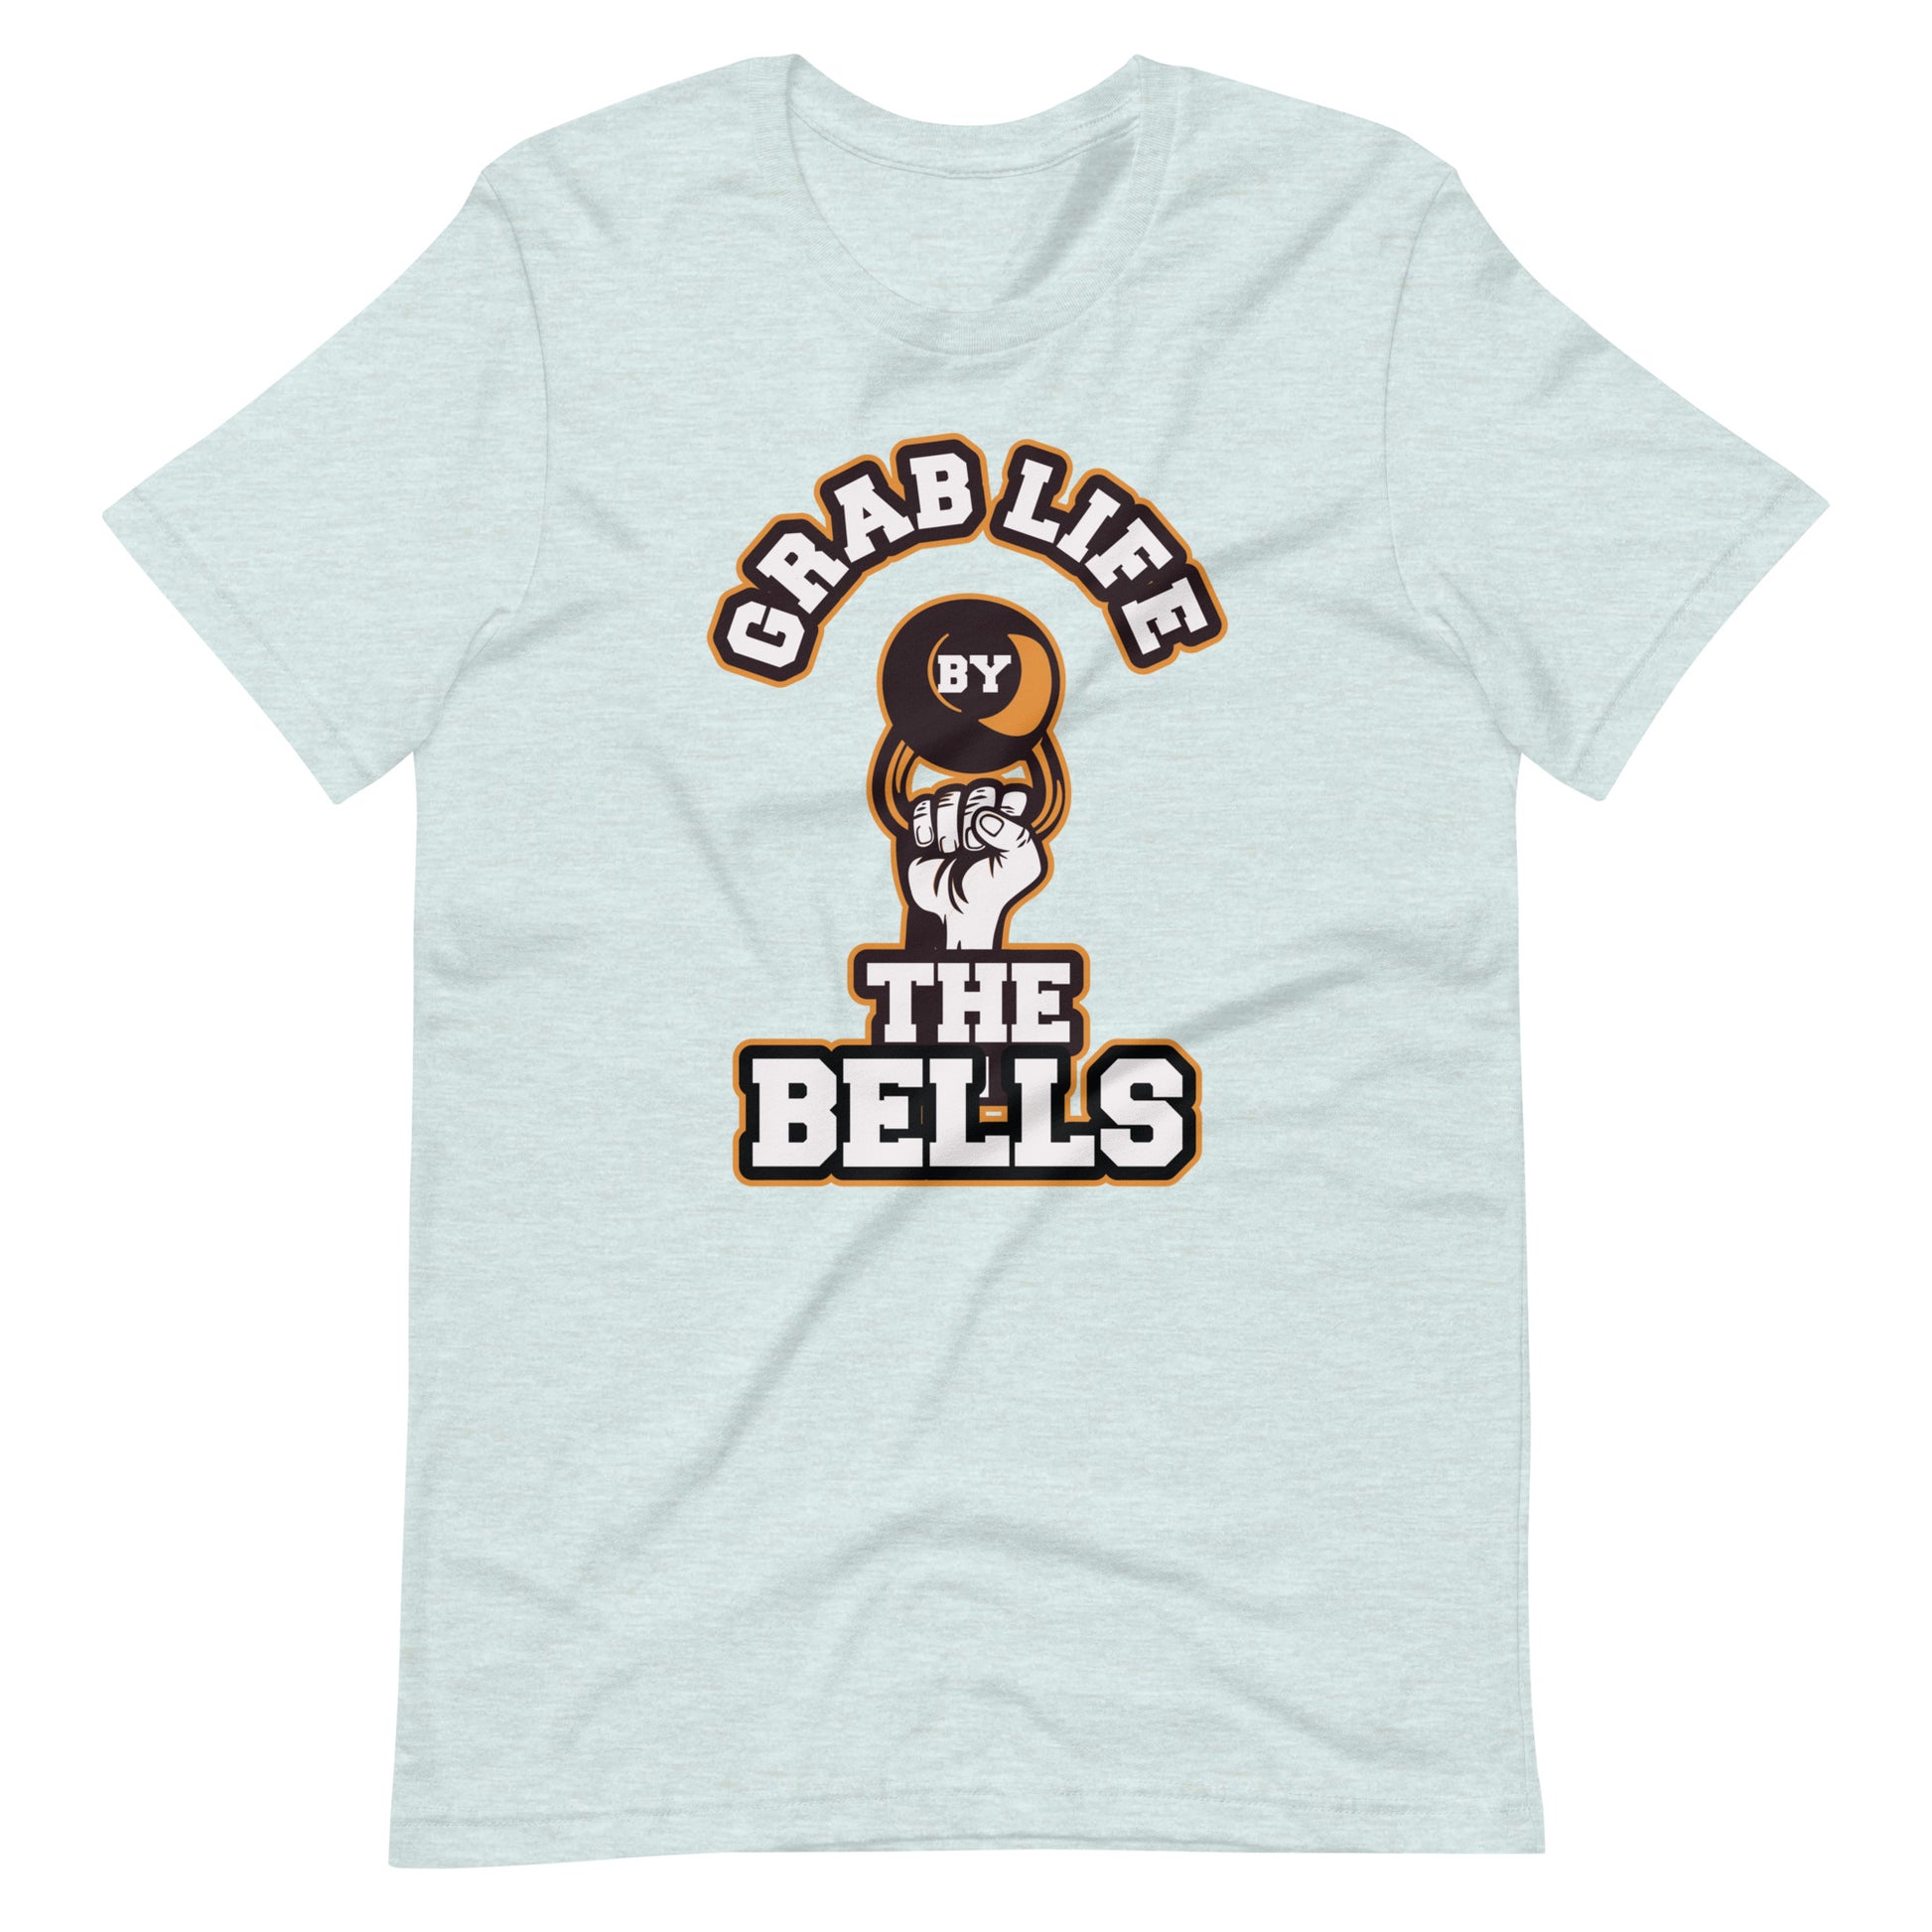 Grab life by the bells unisex t-shirt The Workout Inspiration